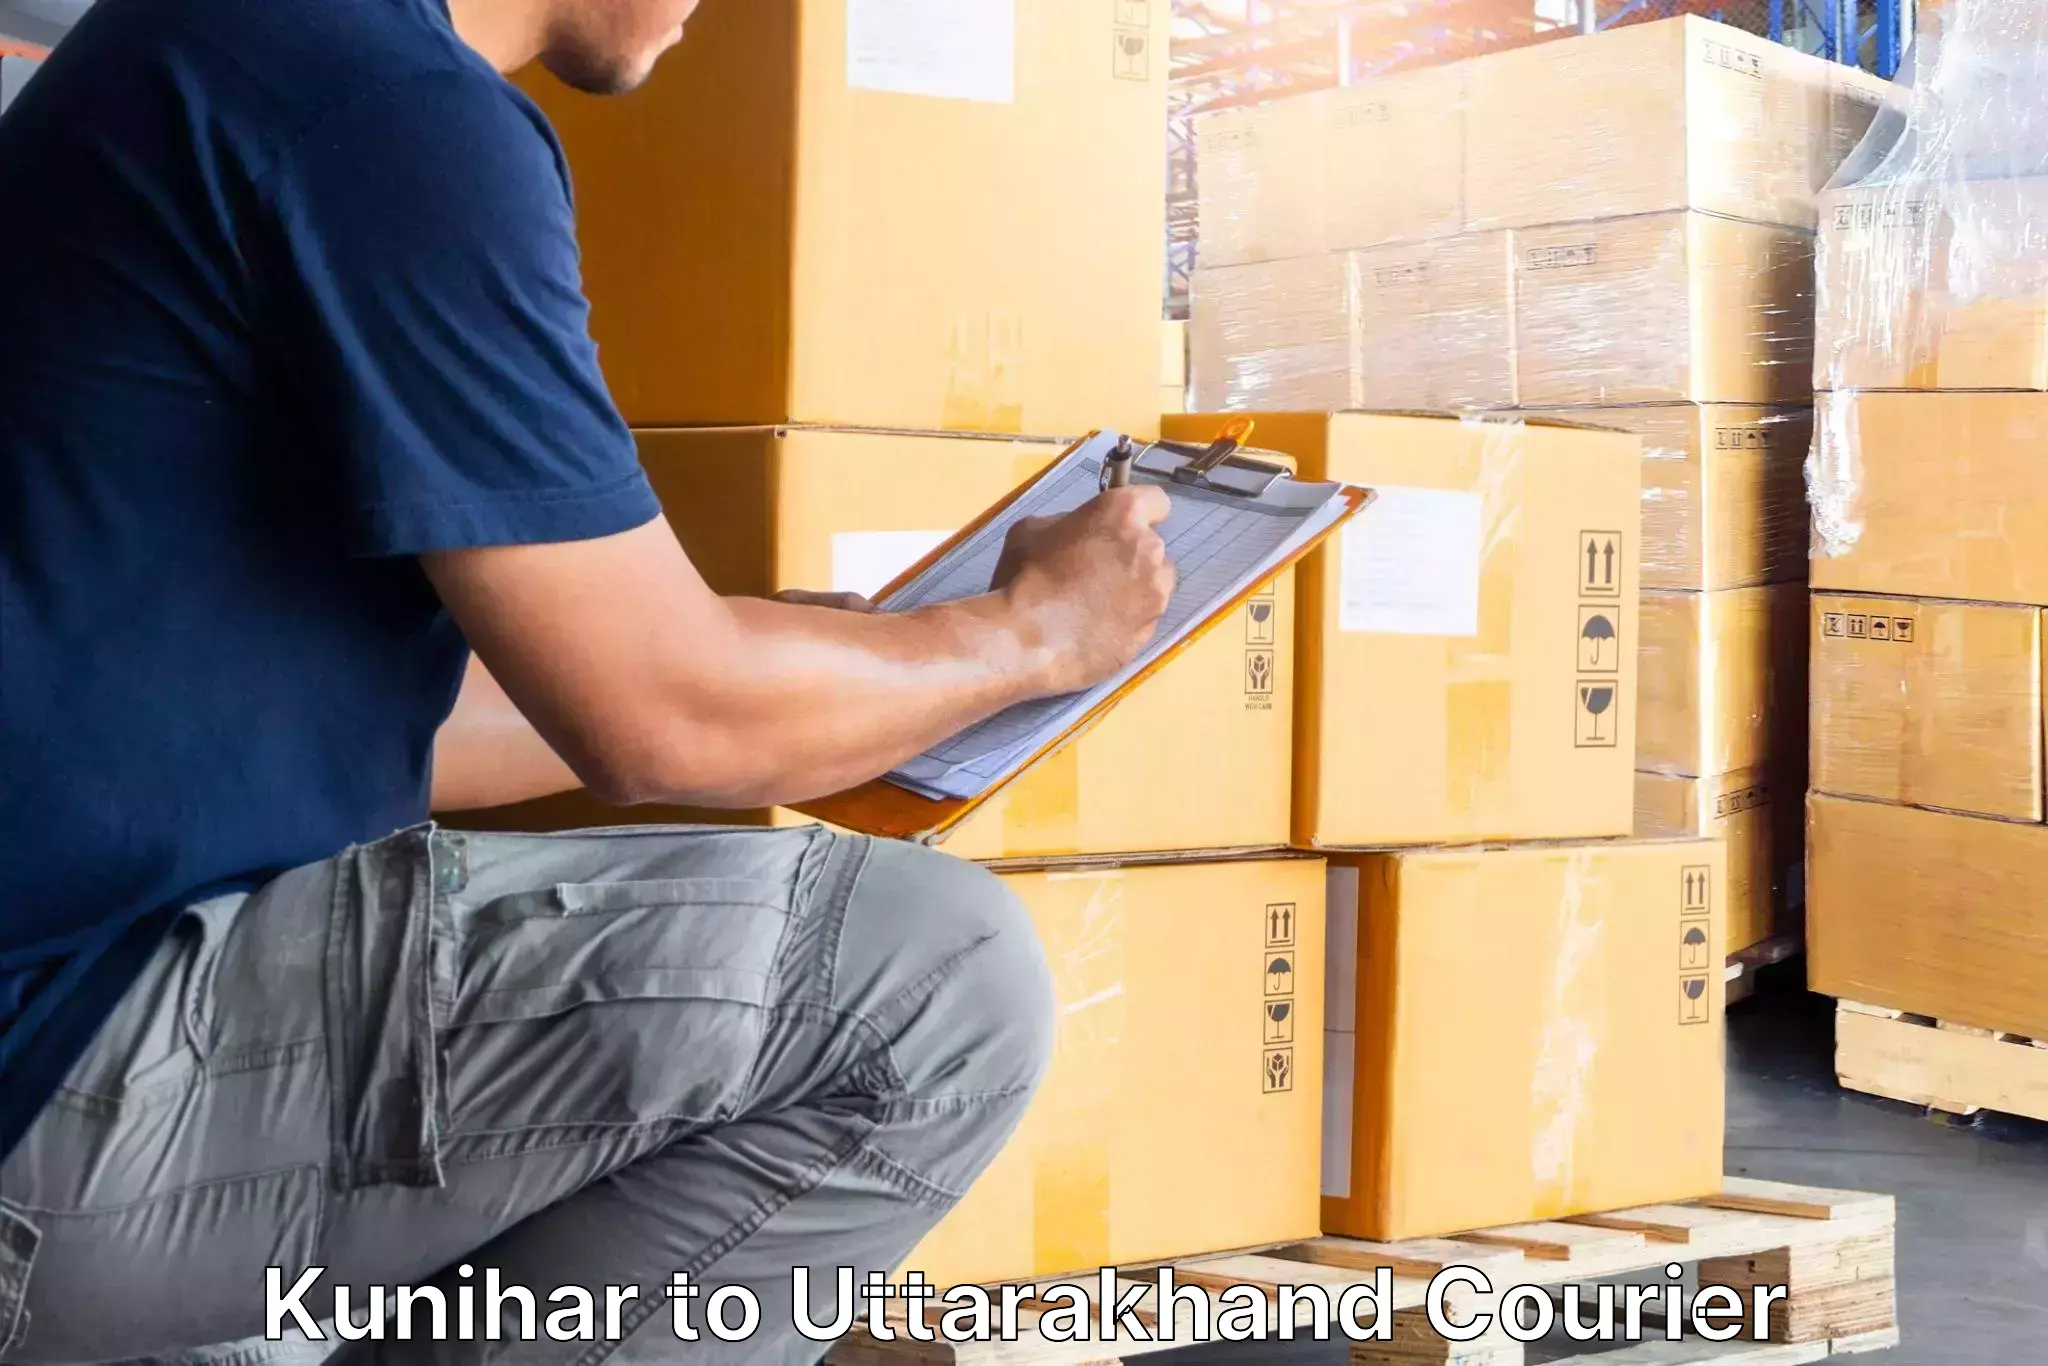 Furniture moving specialists Kunihar to Bhagwanpur